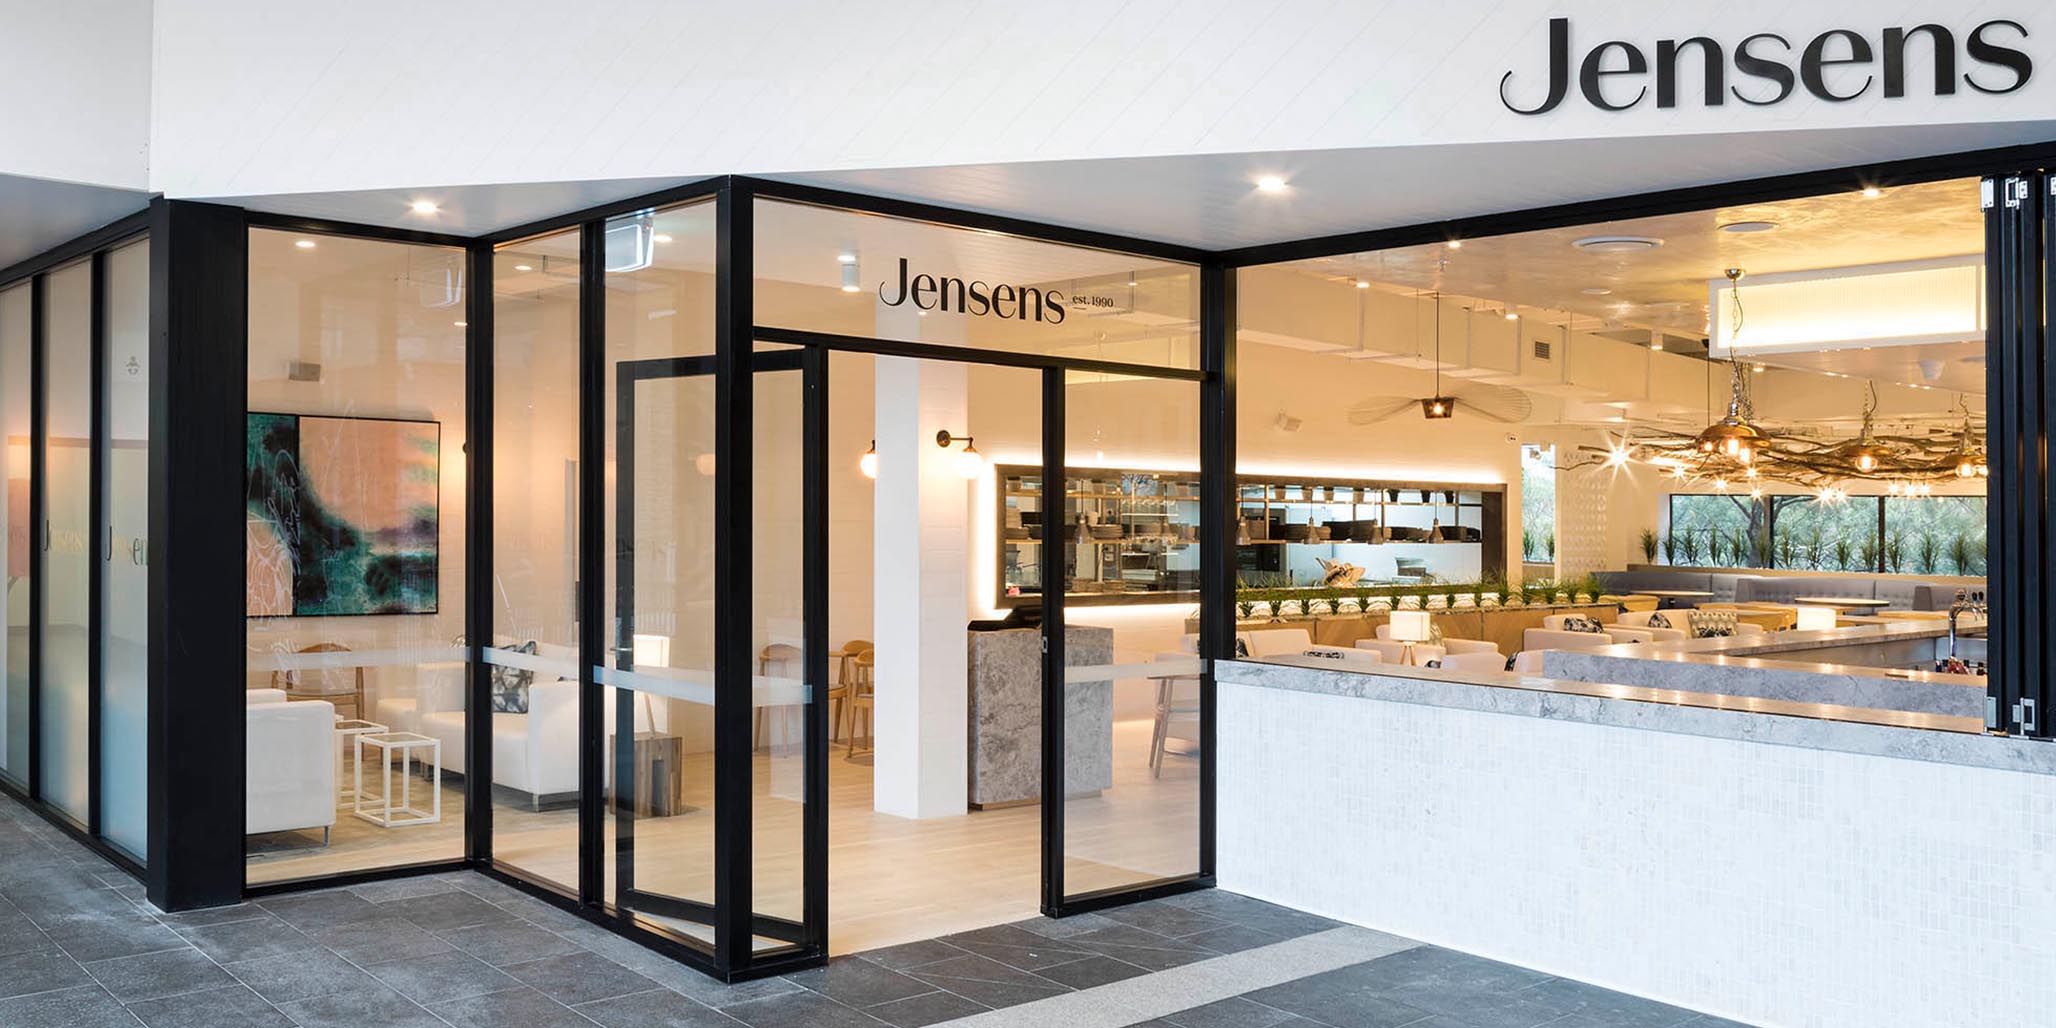 Brand & Website Design project in Sydney for hospitality venue Jensens Restaurant, a leader in the food service industry of Australia, image A